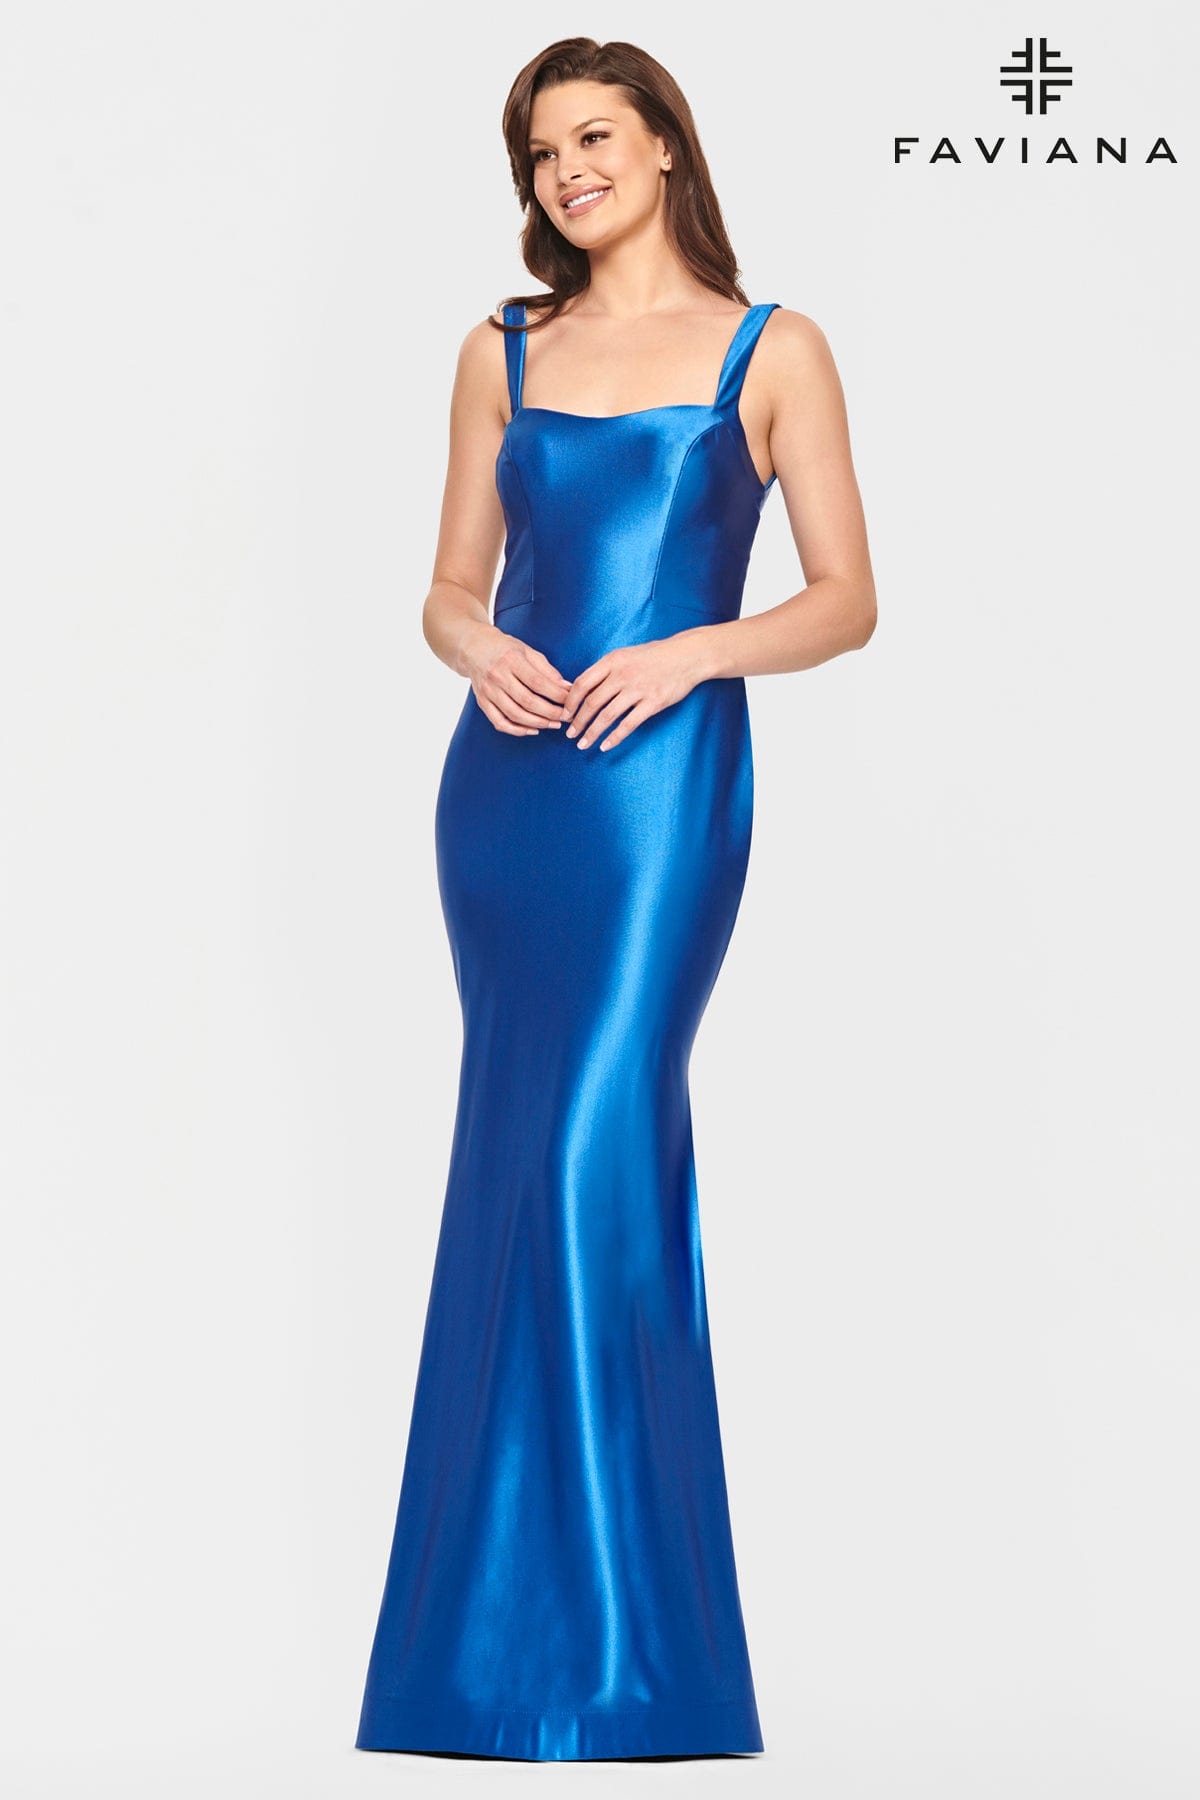 Cobalt Blue Satin Scoop Neck Dress With Strappy Open Back Detailing And Fit And Flare Skirt